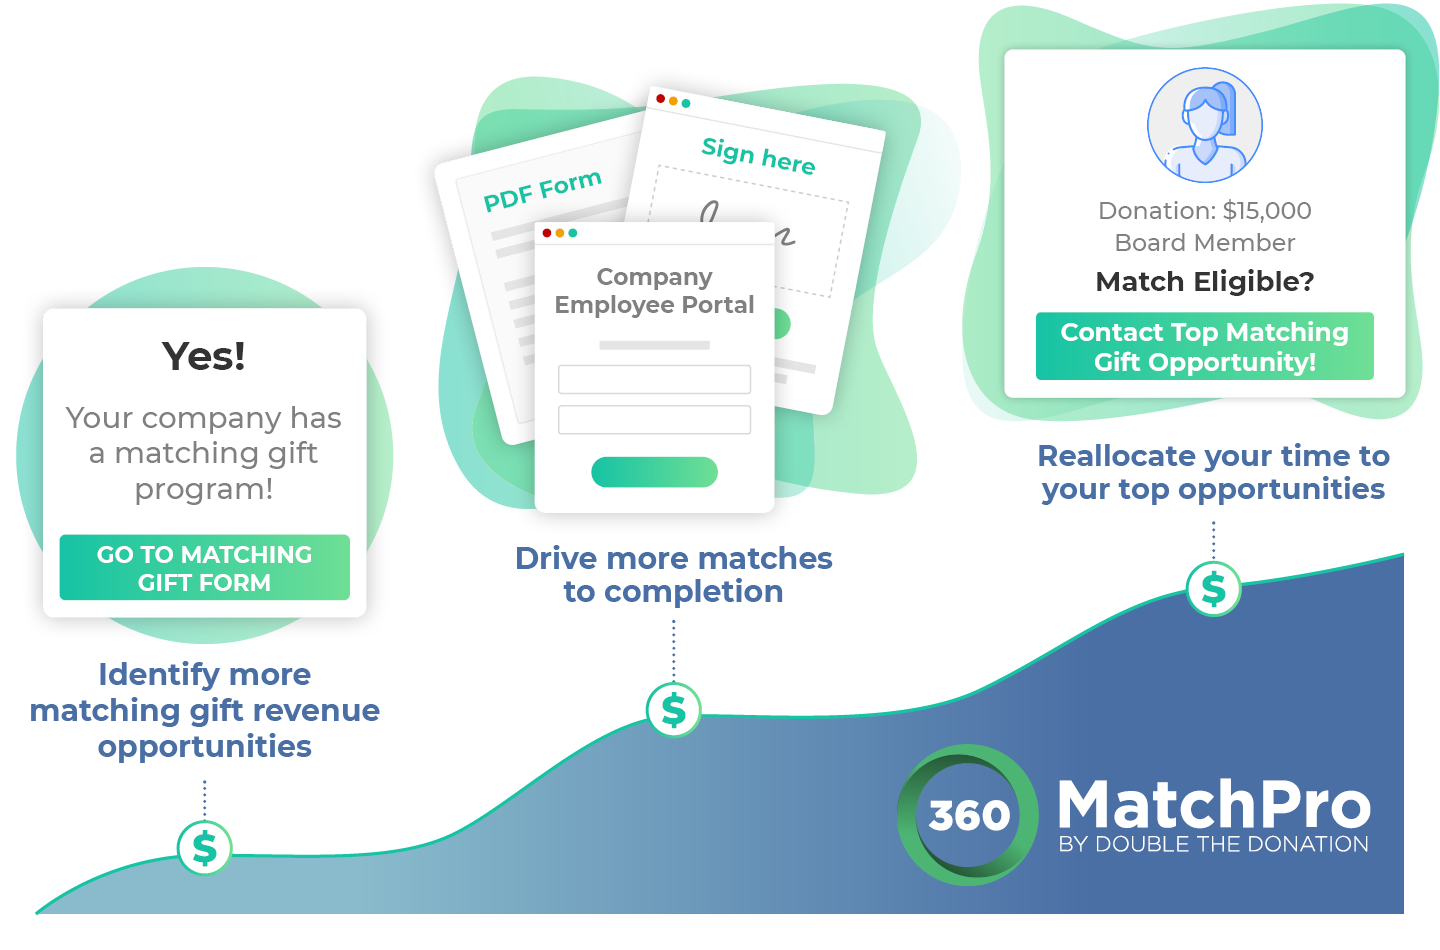 This image lists the features of 360MatchPro alongside an increasing graph to represent increasing donations. 